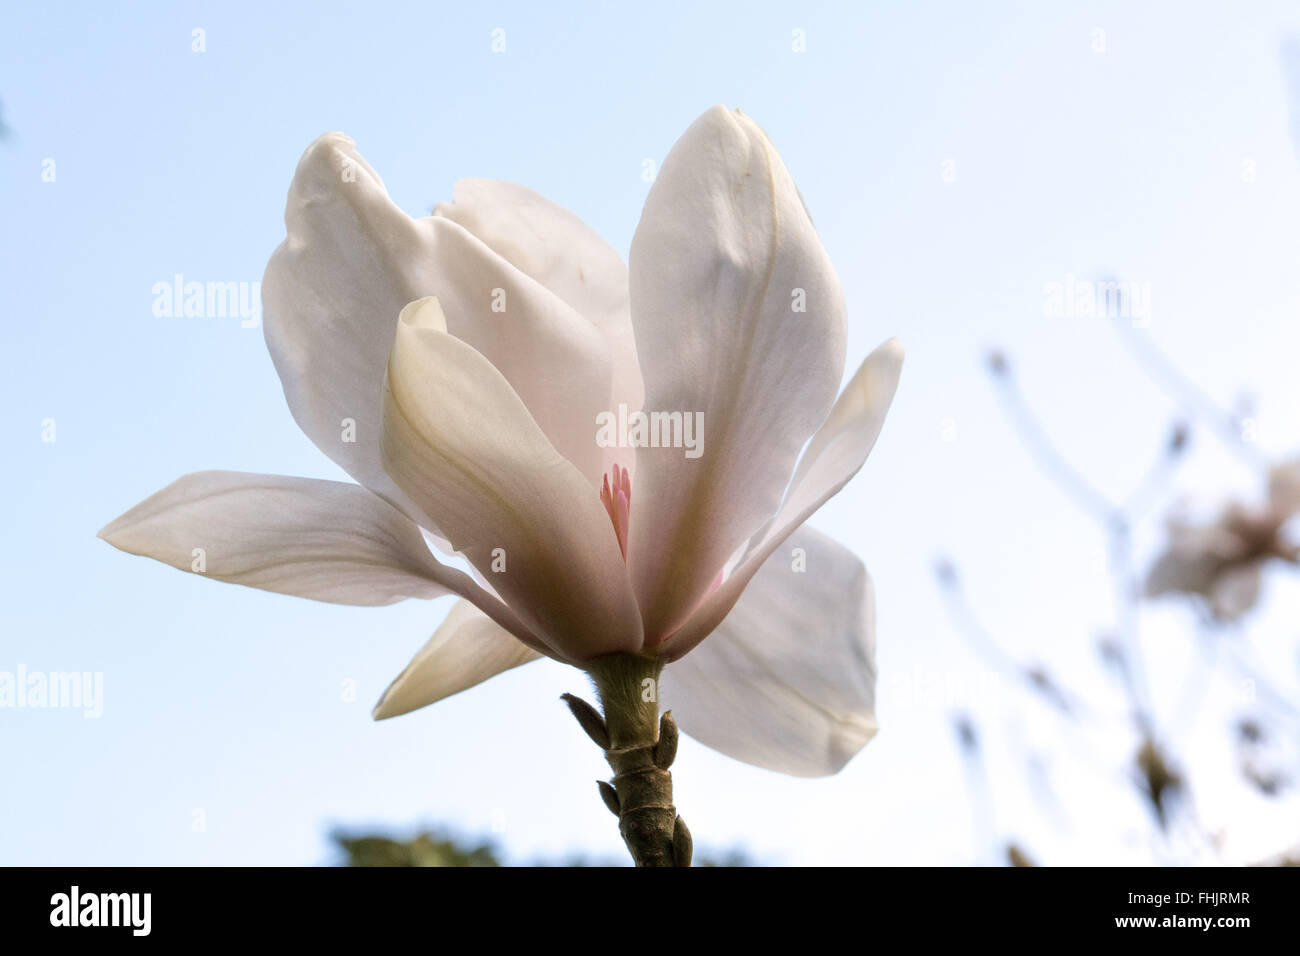 Caerhays, Cornwall, UK. 25th February 2016.  UK Weather. Glorious spring sunshine at Caerhays gardens and castle, bringing out the best of the Magnolia blooms. The gardens have been anounced as the winner of the 2016 Garden of the Year award  by the Historic Houses Association. Credit:  Simon Maycock/Alamy Live News Stock Photo